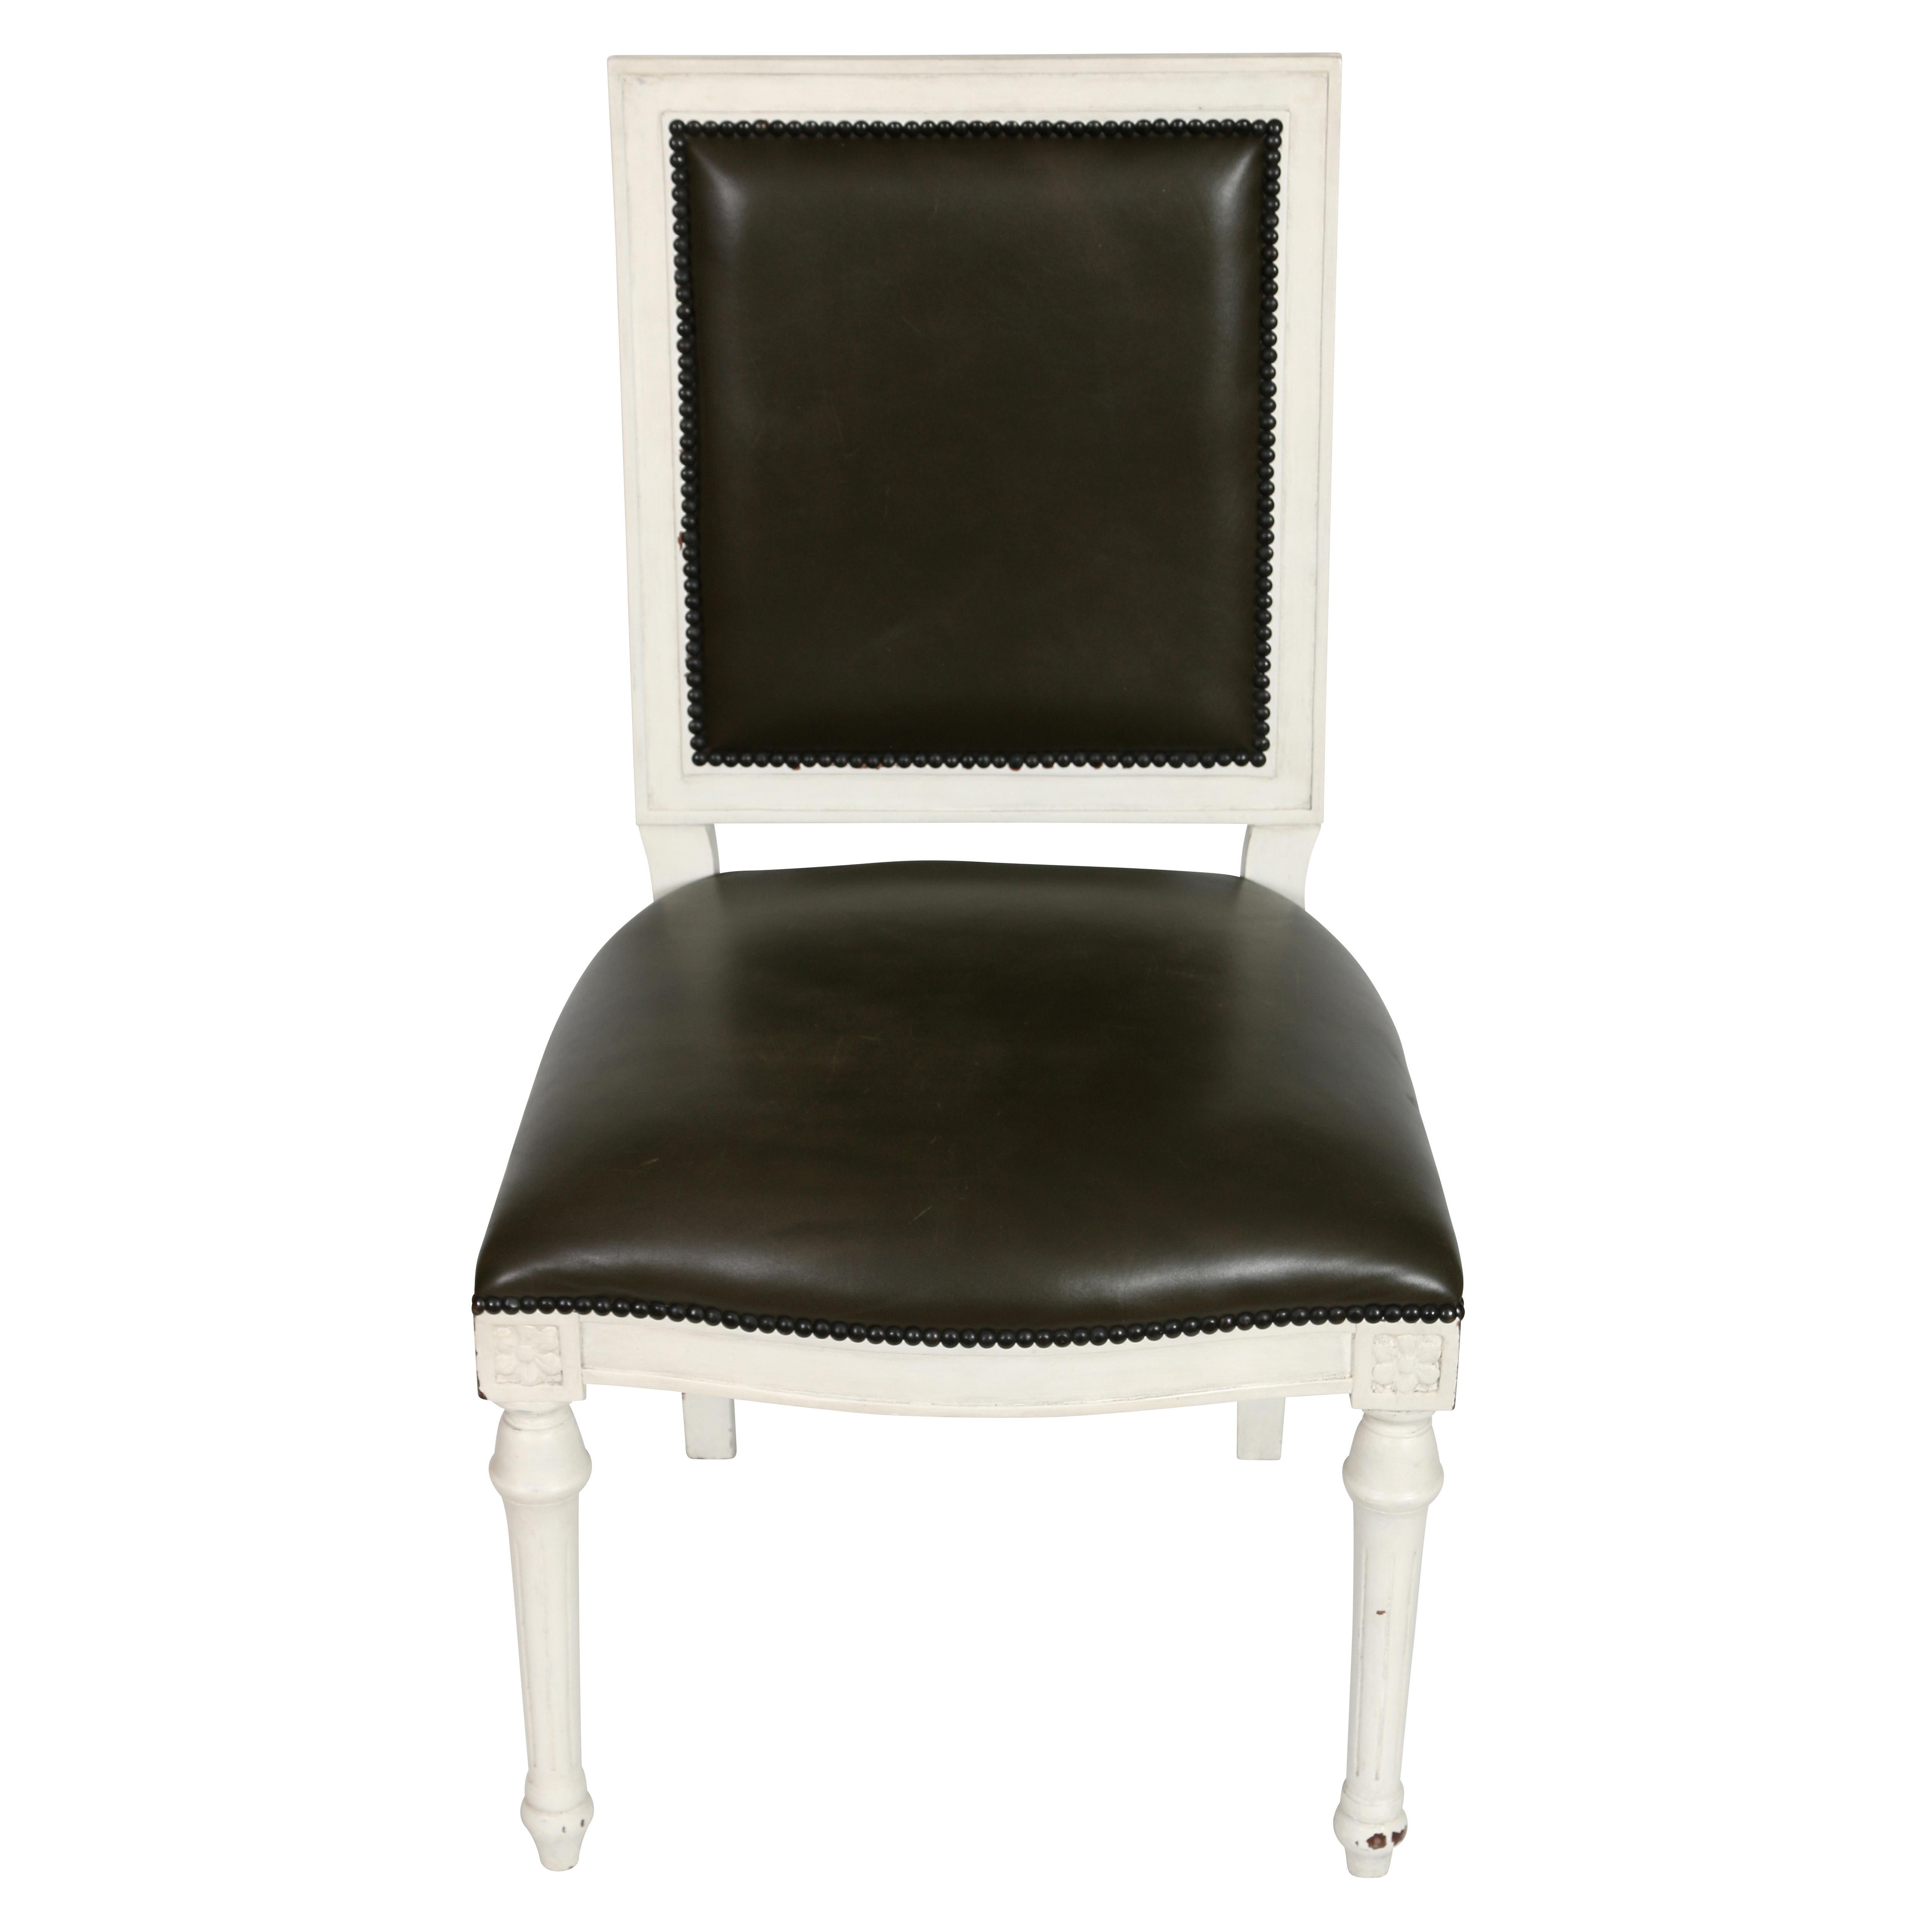 The striking contrast between the chalky white painted finish and the deep, chocolate brown leather upholstery is what makes these chairs so good looking. The chairs feature a squared back and a slightly curved seat and are finished with a nail head